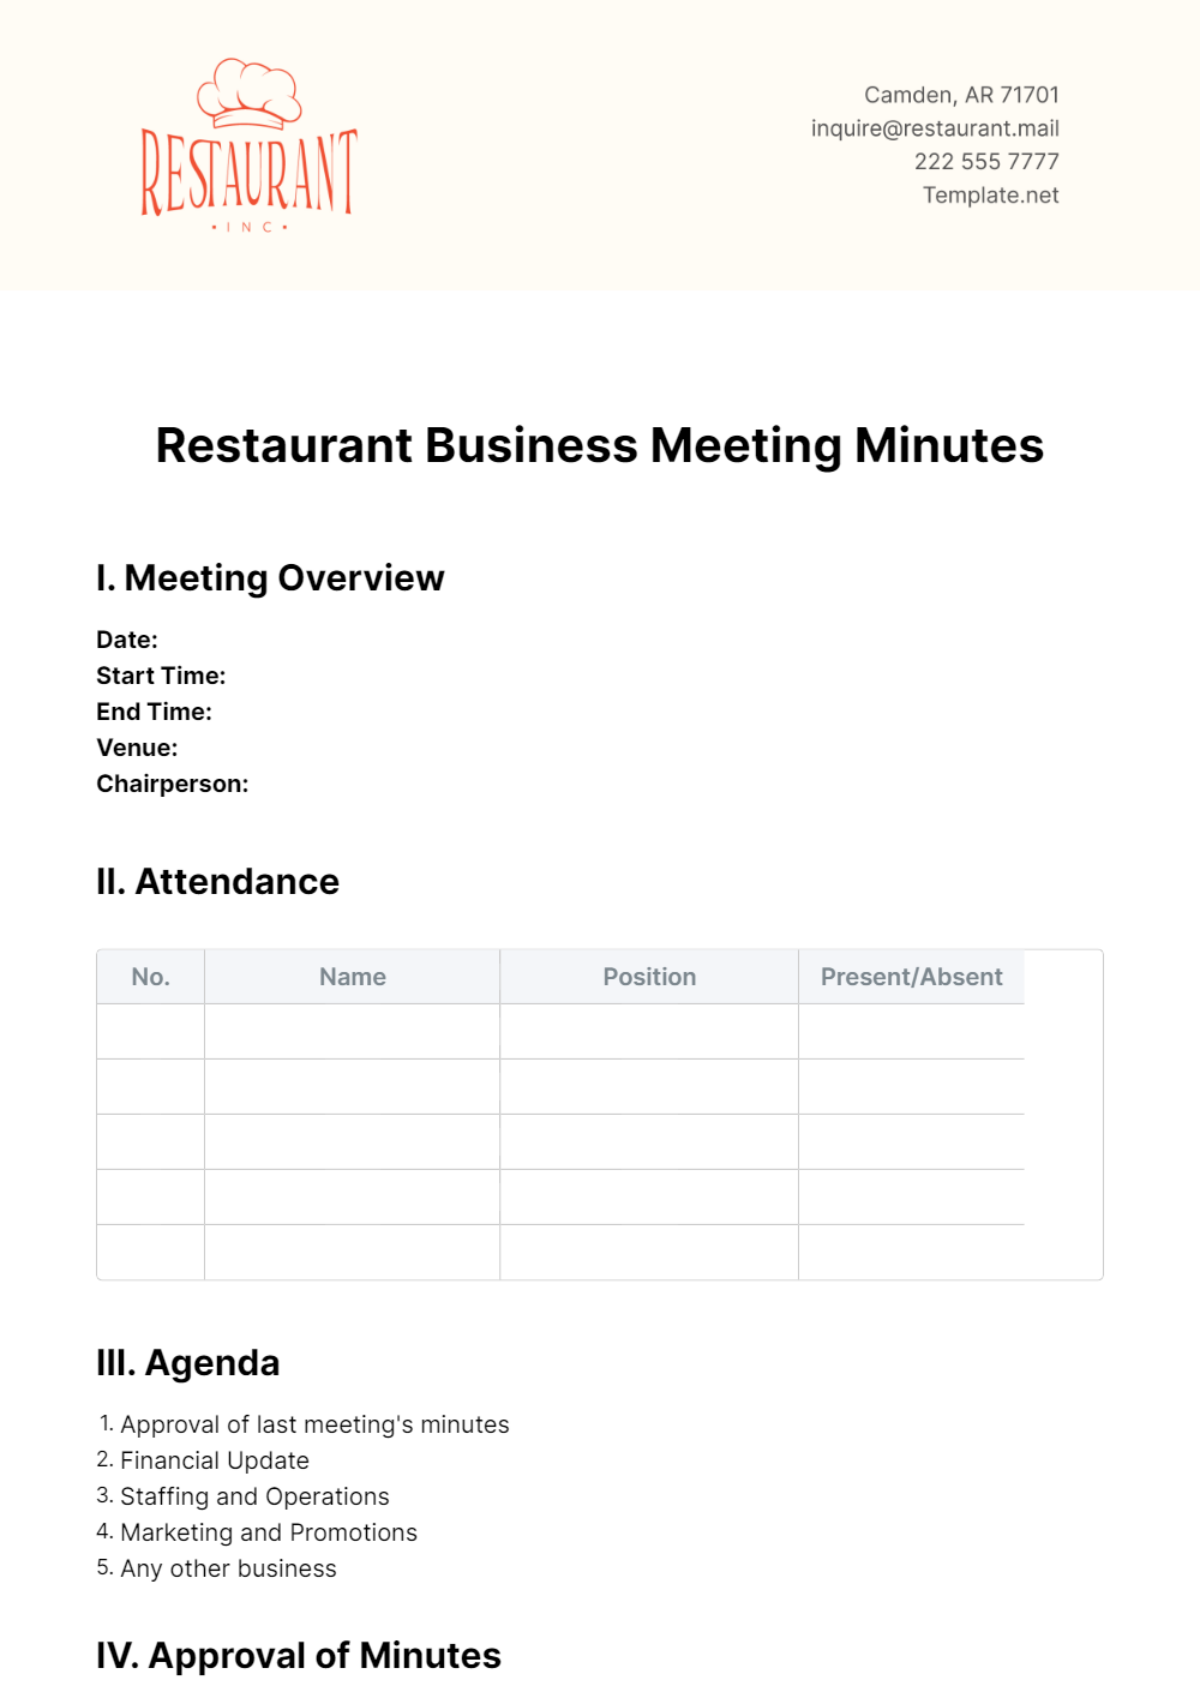 Free Restaurant Business Meeting Minutes Template